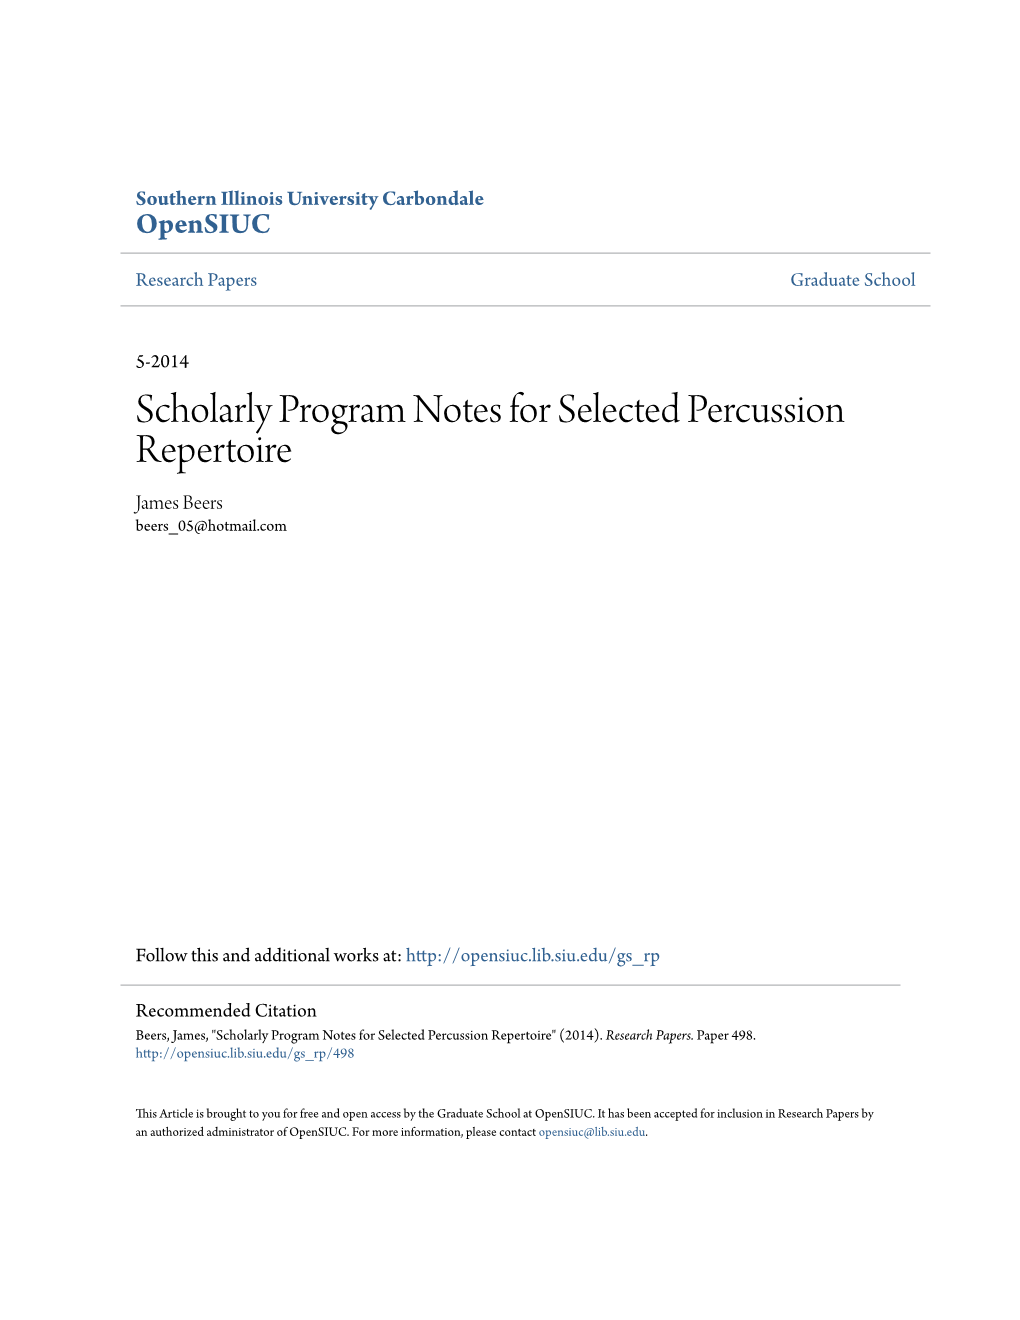 Scholarly Program Notes for Selected Percussion Repertoire James Beers Beers 05@Hotmail.Com